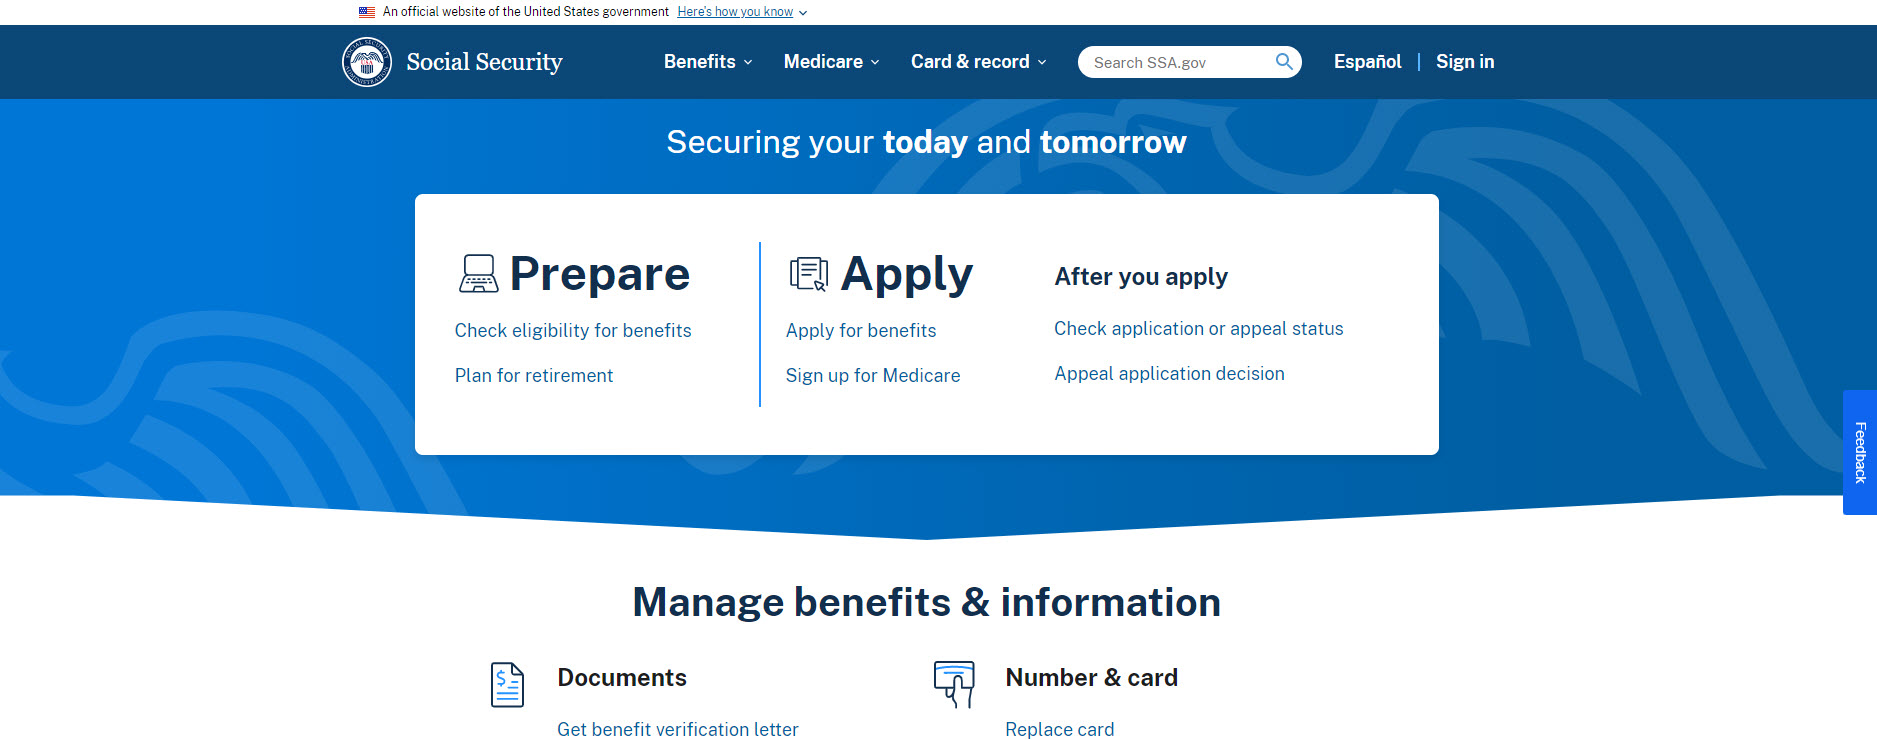 Social Security New Homepage